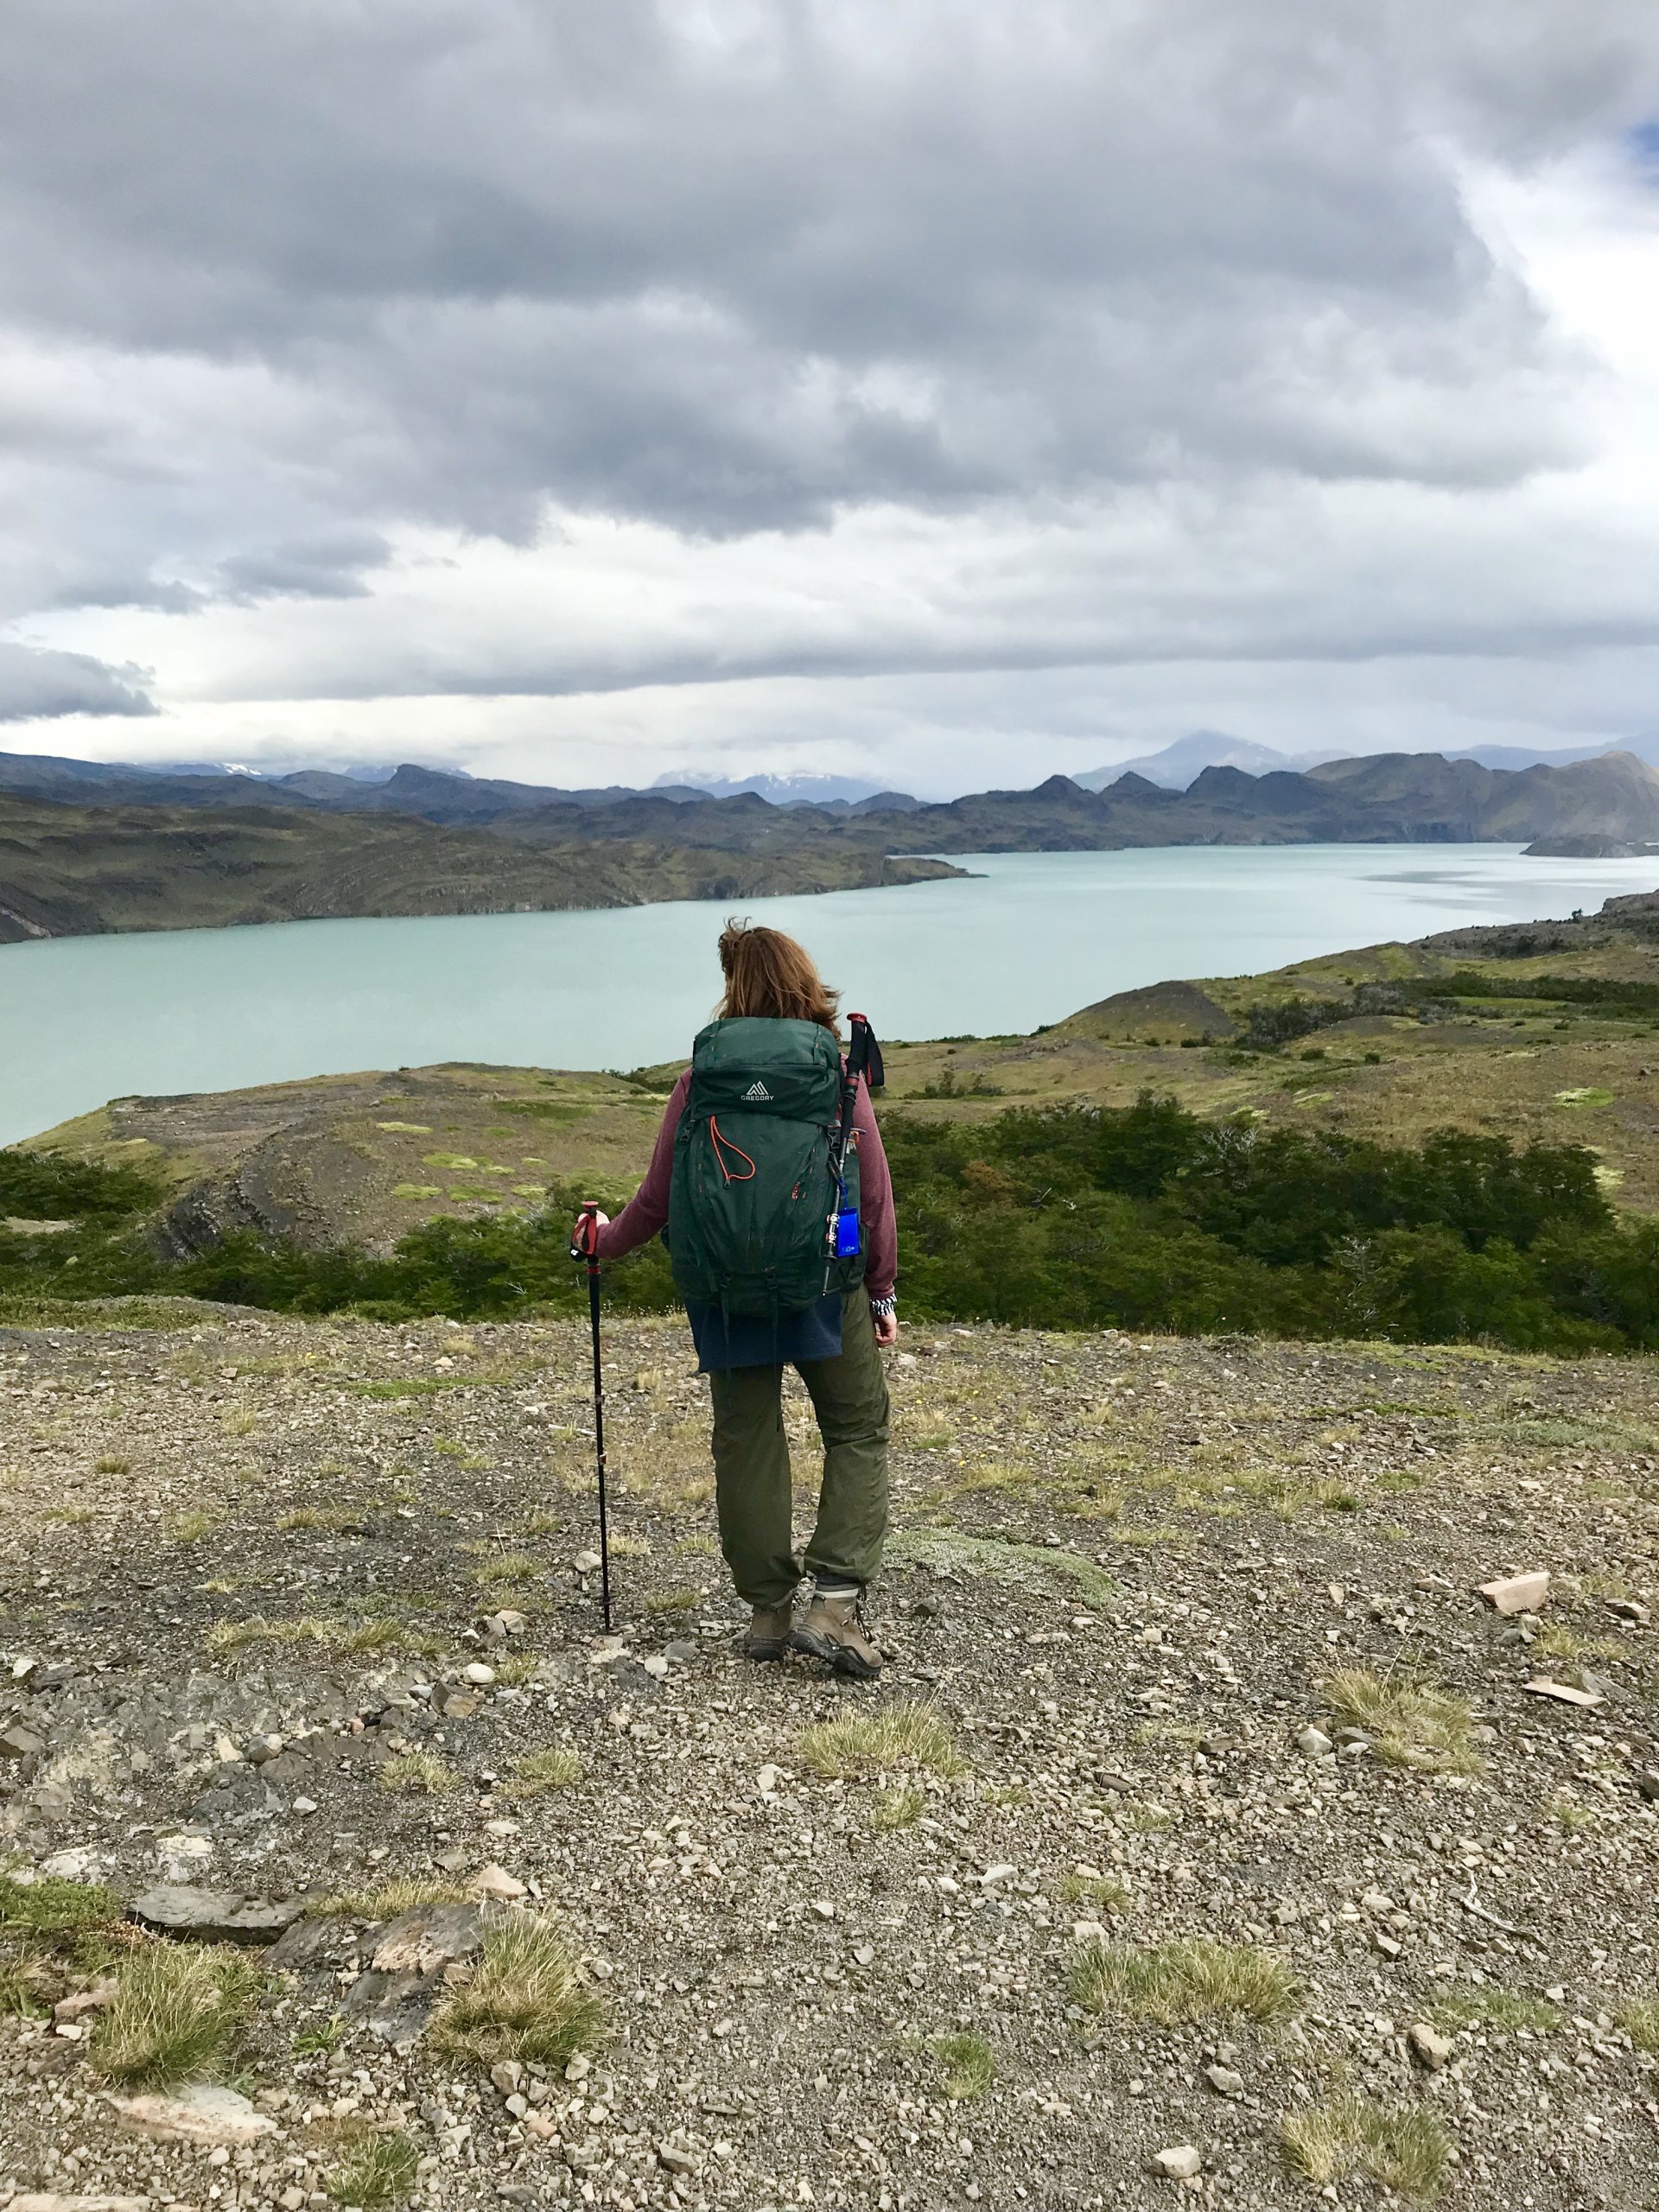 Me hiking Patagonia with my pack.